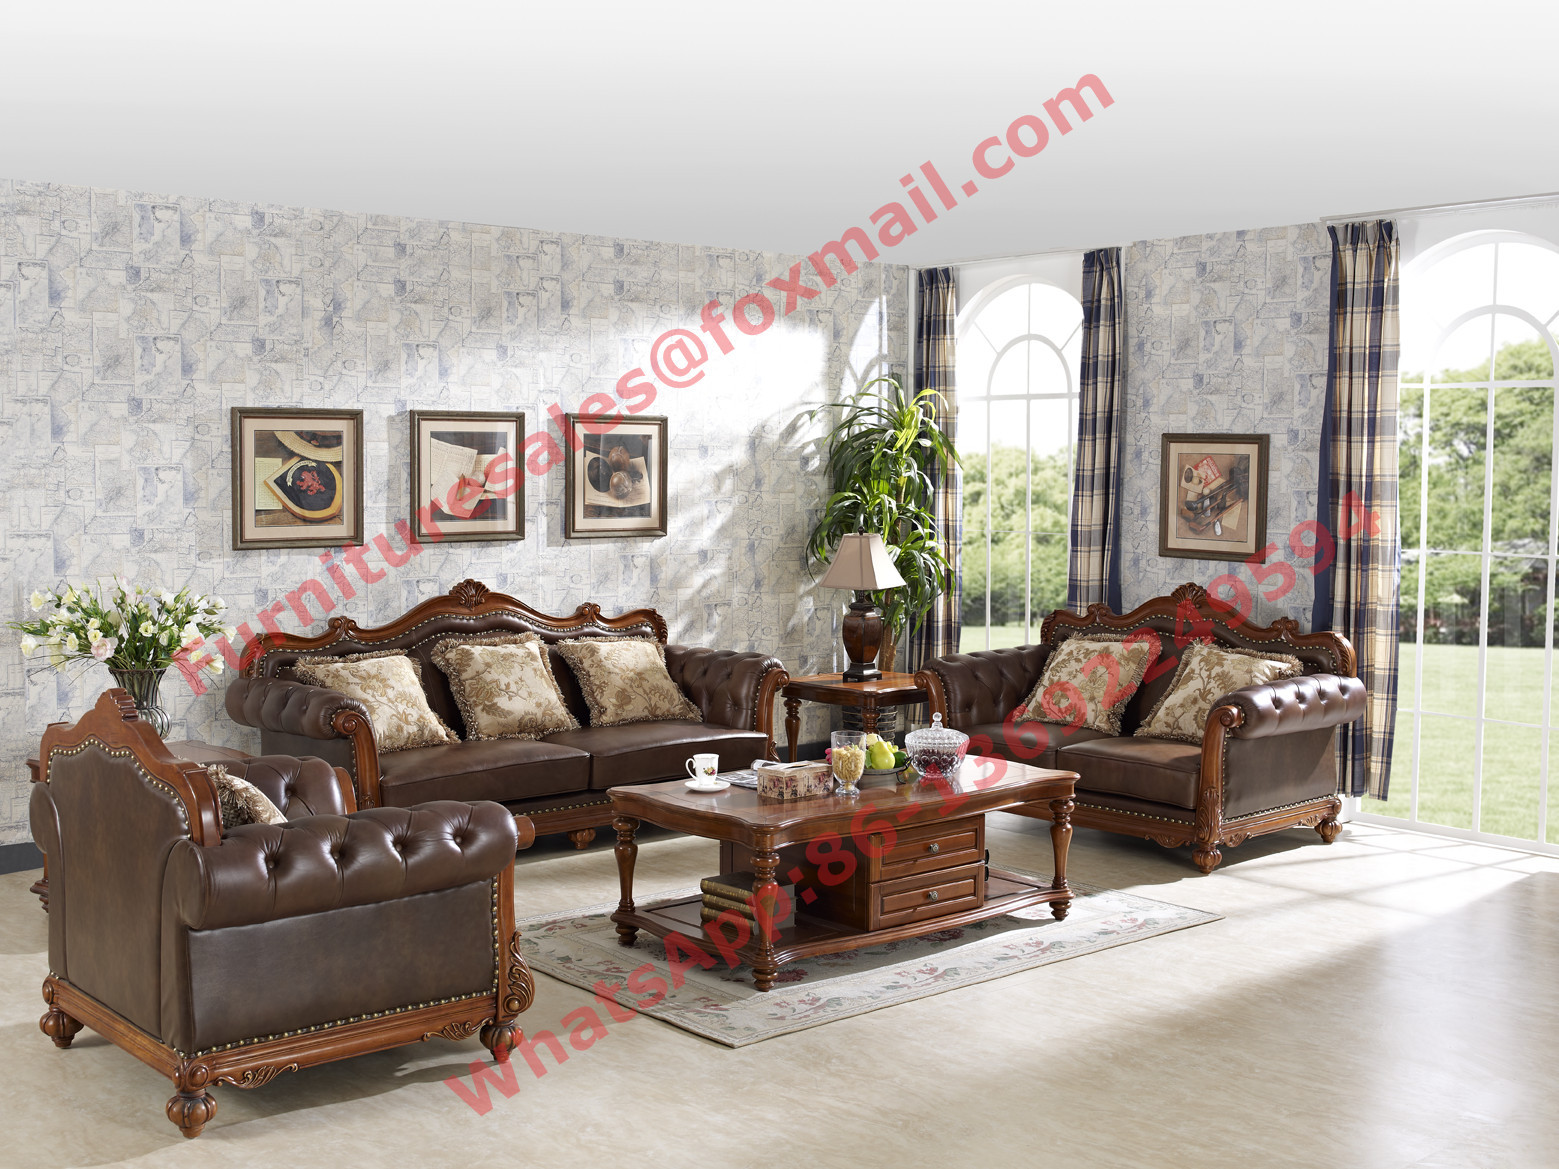 Buy cheap 1+2+3 Italy Leather Upholstery Sofa Set with Wooden Tv Stand and Storage Cabinet product